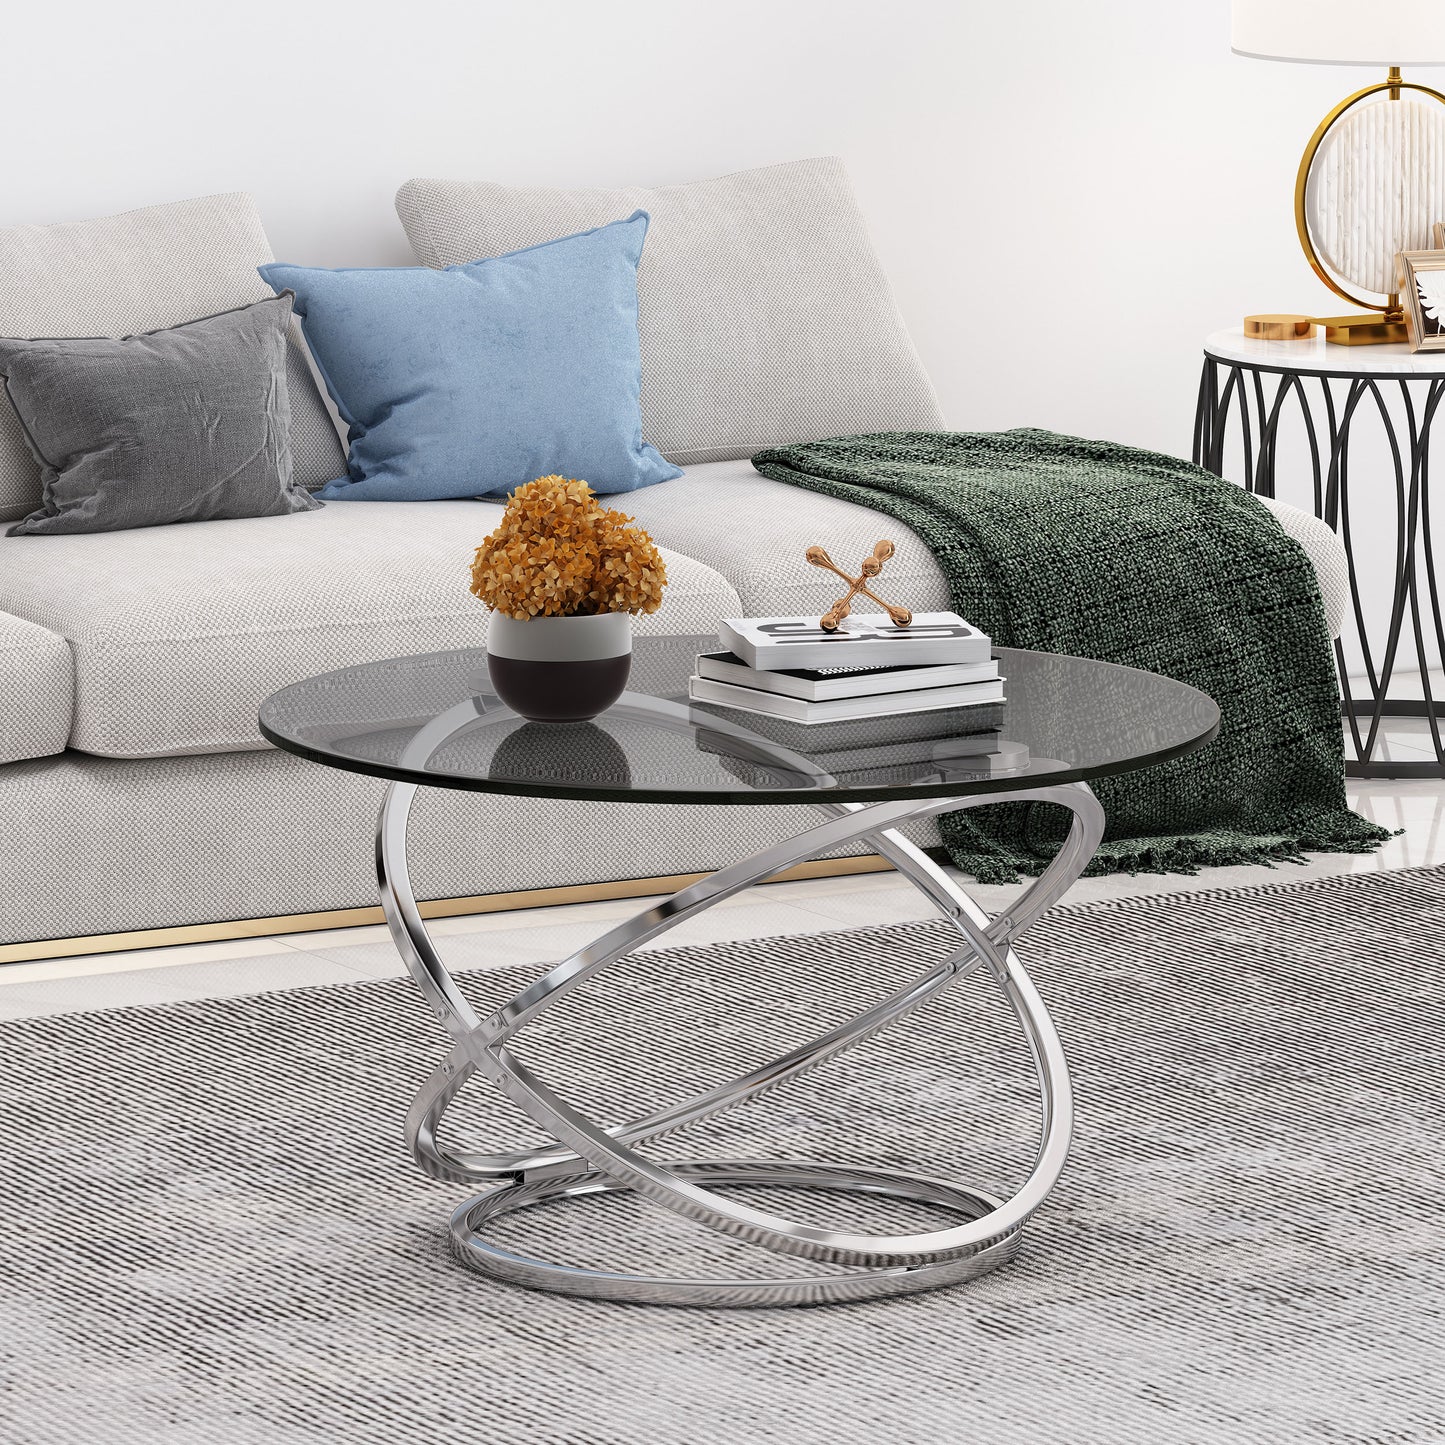 Hearney Modern Glass Top Round Coffee Table, Gray and Chrome